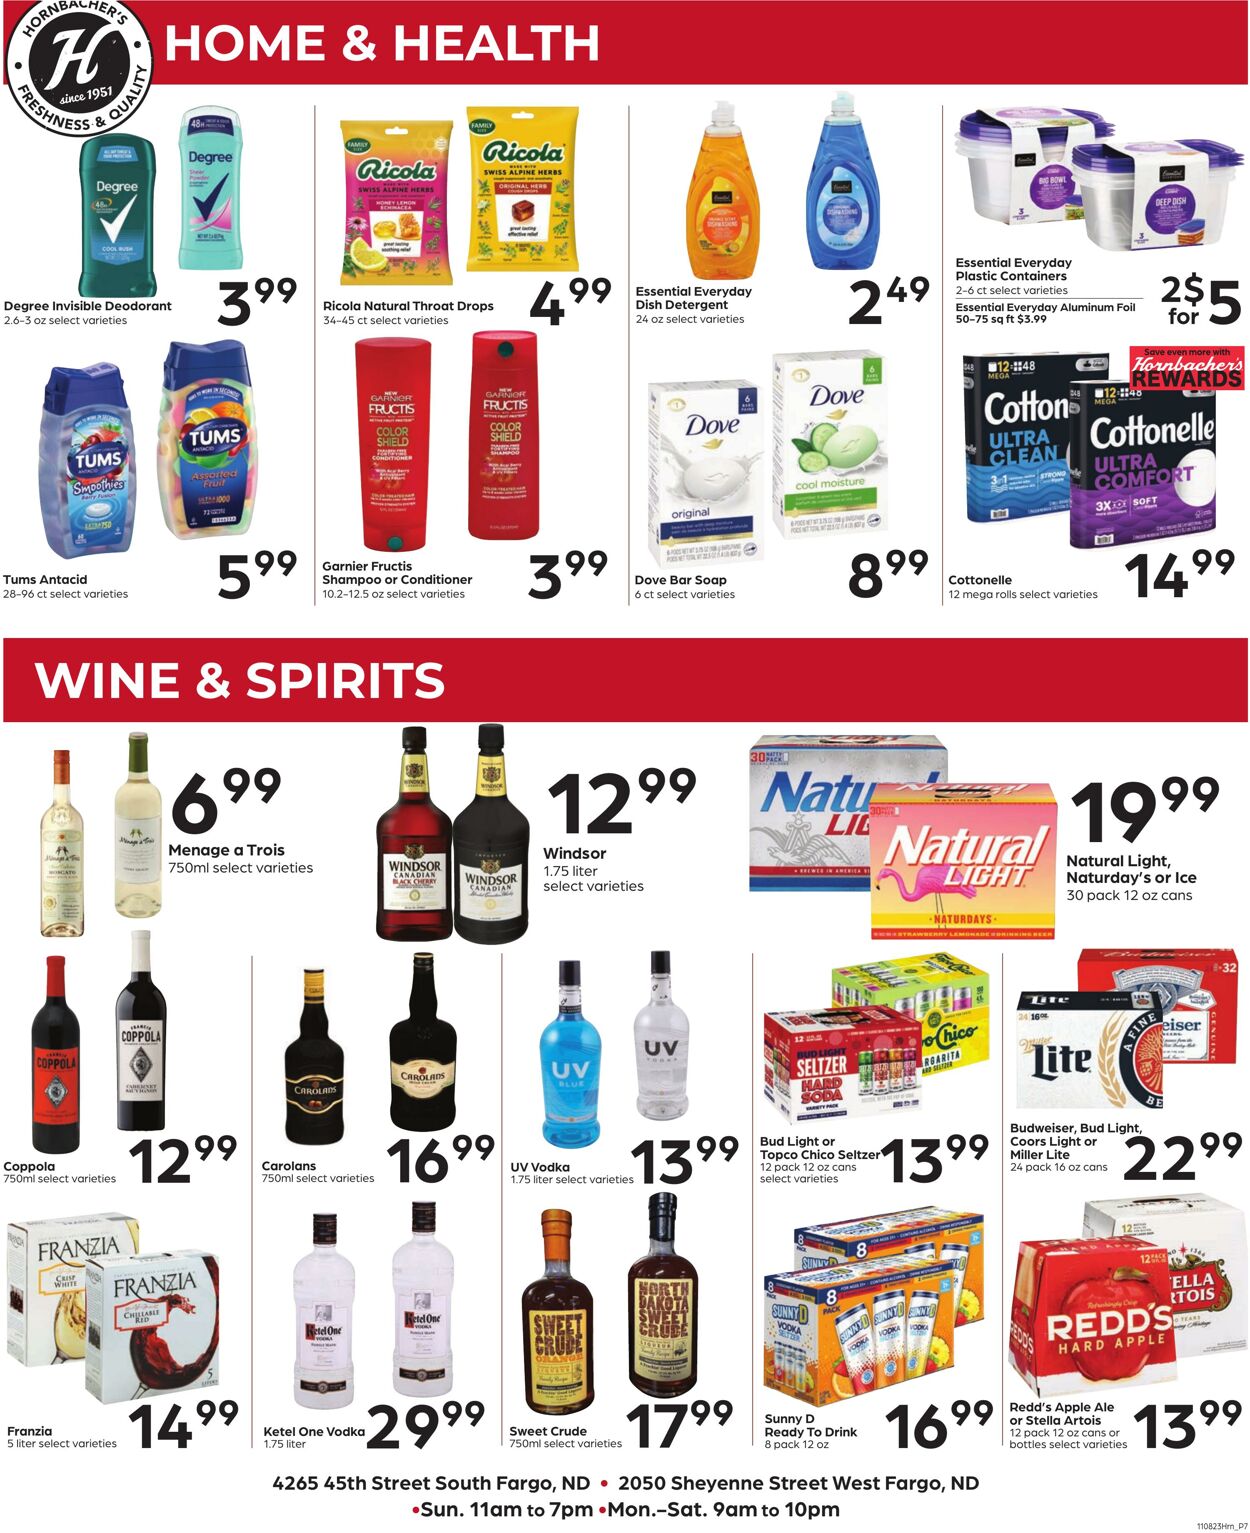 Weekly ad Hornbacher's 11/08/2023 - 11/14/2023